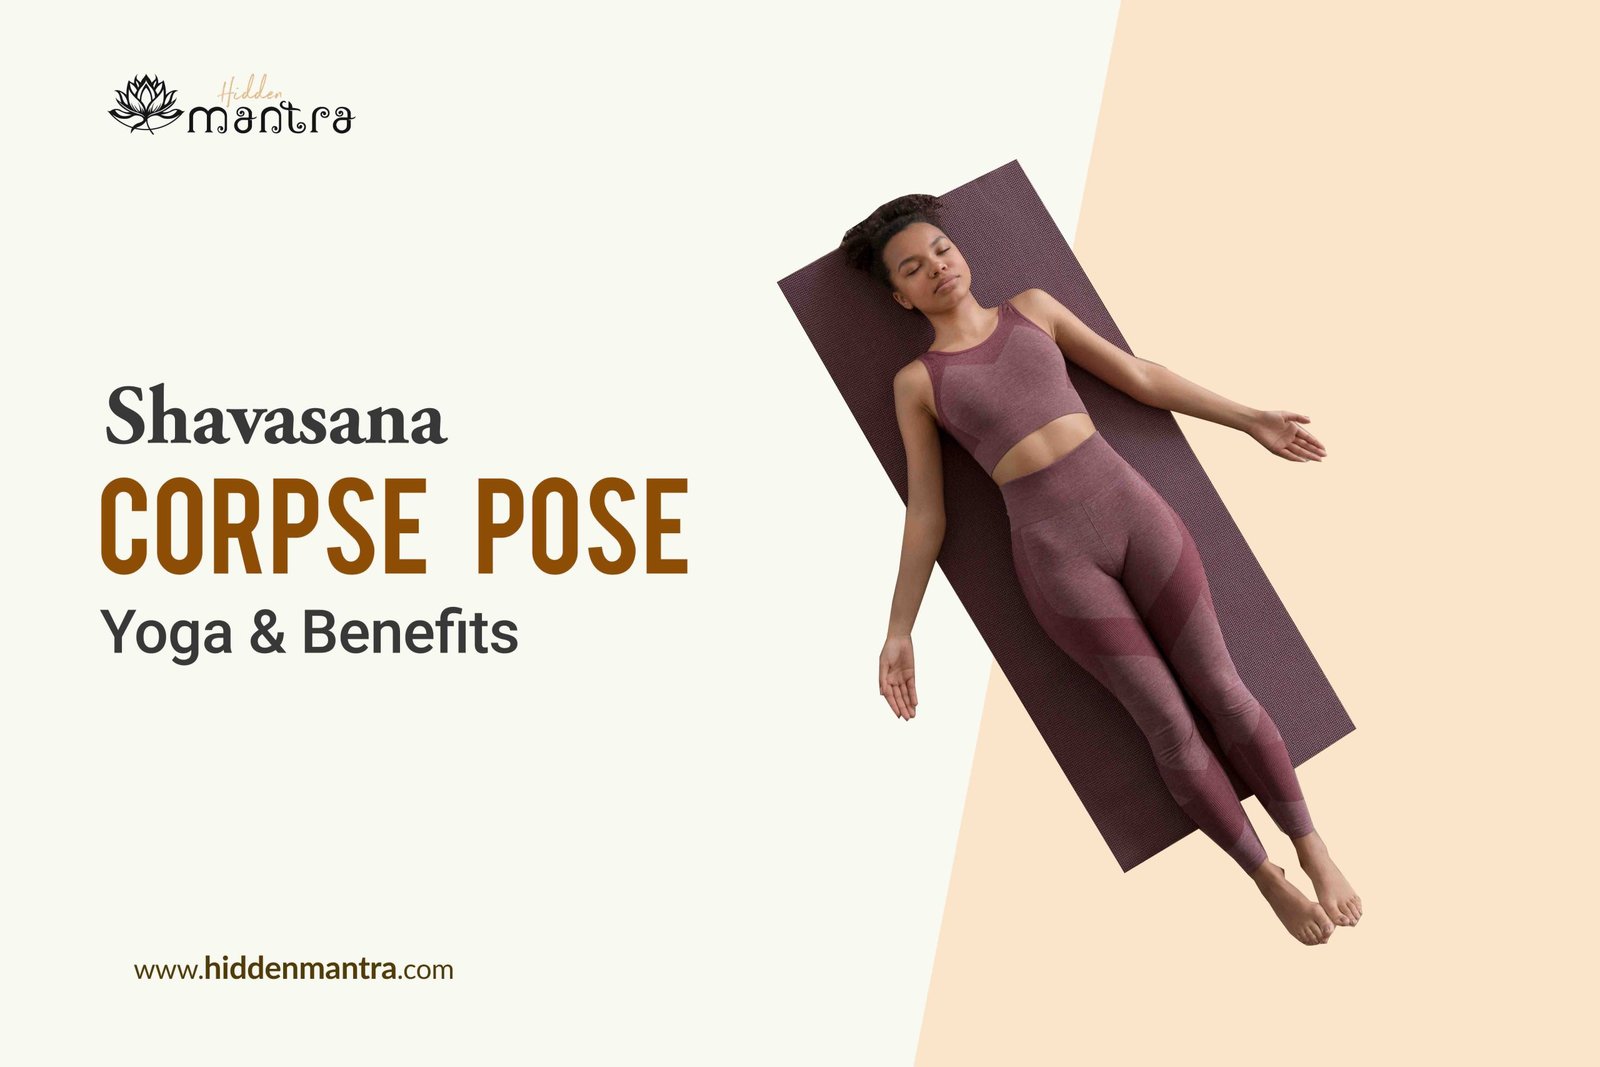 Aum Sahasrara Yoga - Benefits of Shavasana :- The corpse pose or Shavasana  ,can help in relaxing the mind and keeping your cortisol levels in check.  Shavasana can help you relax and